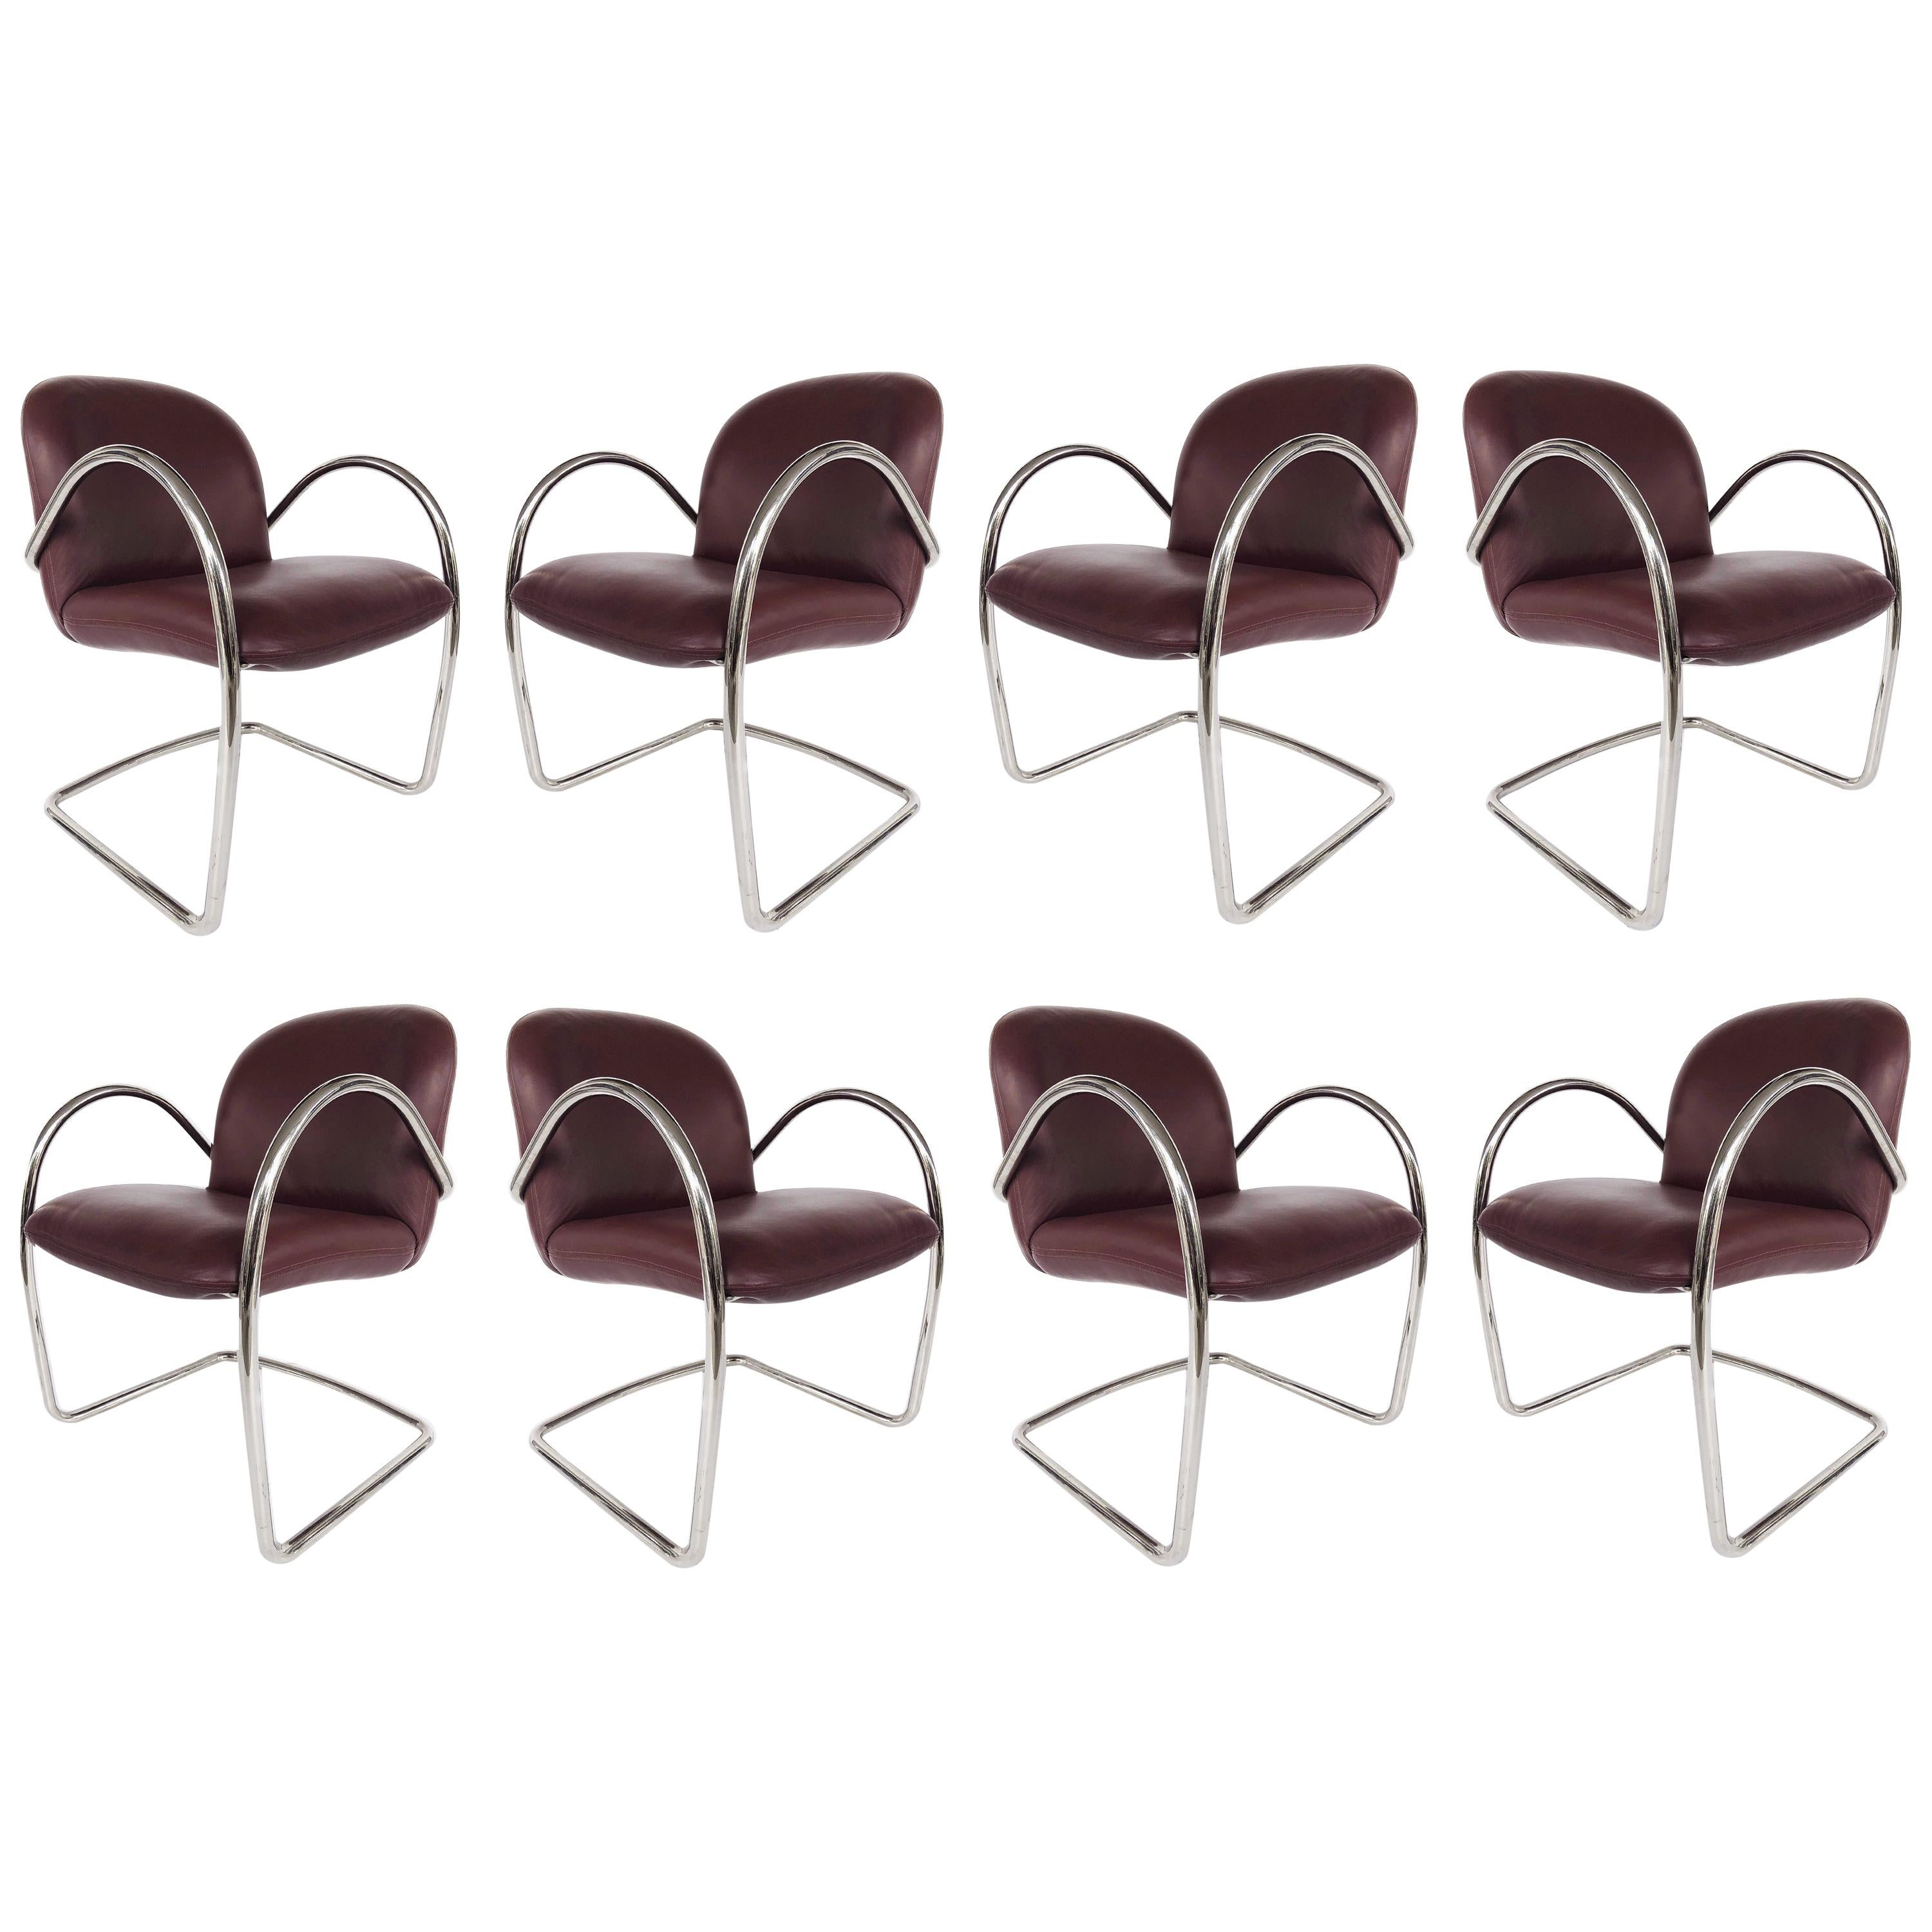 Brueton Leather and Stainless Cantilevered Chairs, Set of 8